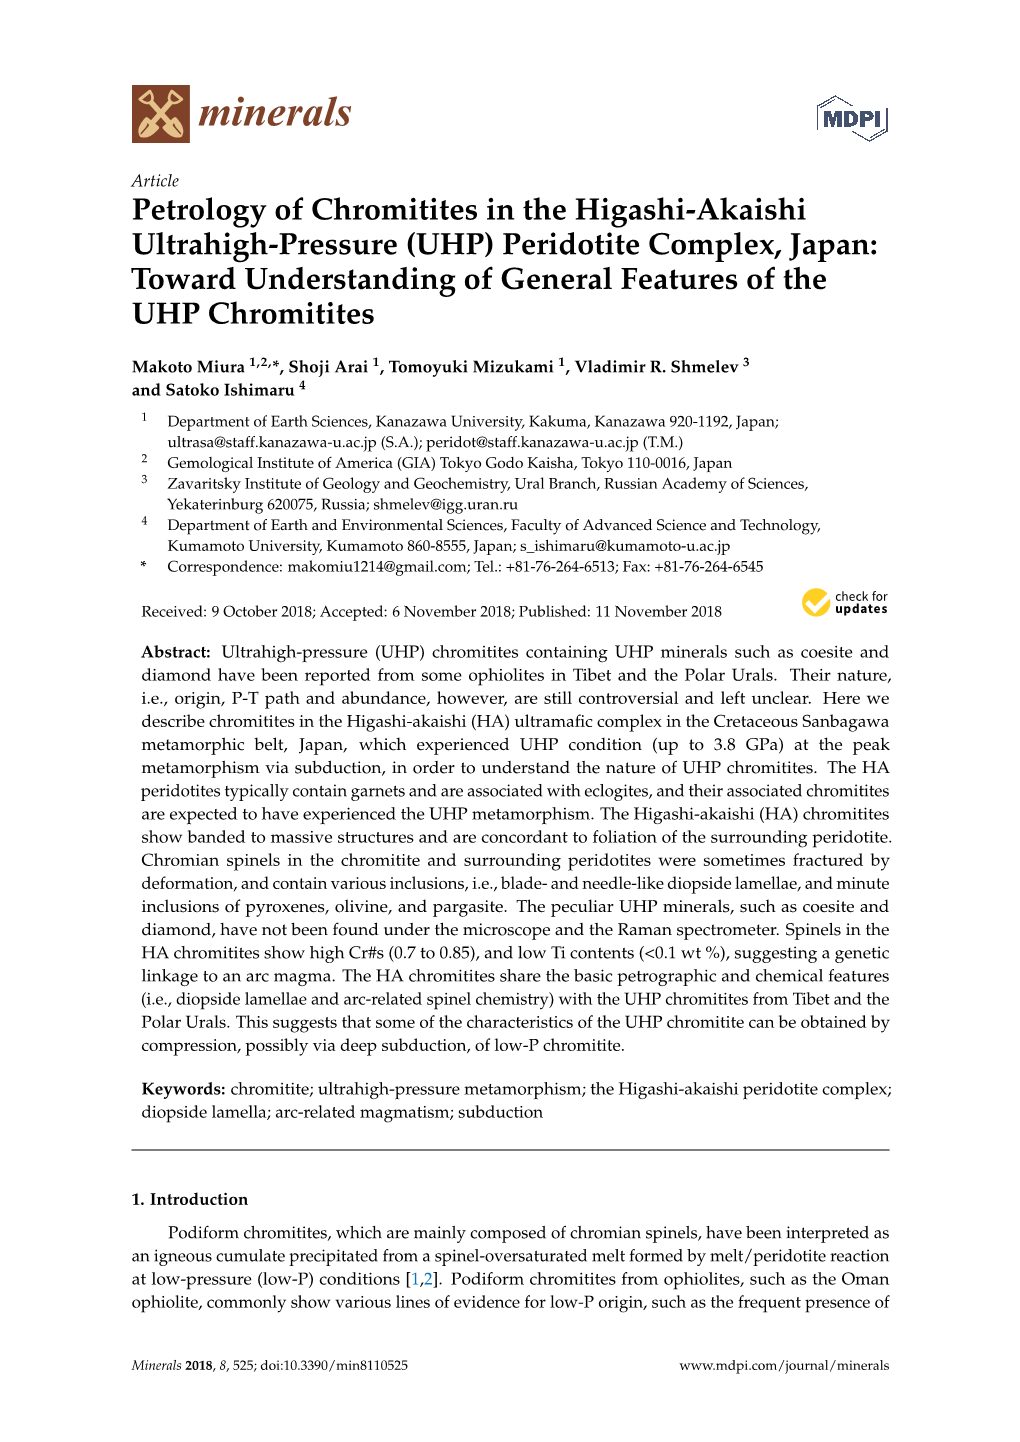 Petrology of Chromitites in the Higashi-Akaishi Ultrahigh-Pressure (UHP) Peridotite Complex, Japan: Toward Understanding of General Features of the UHP Chromitites